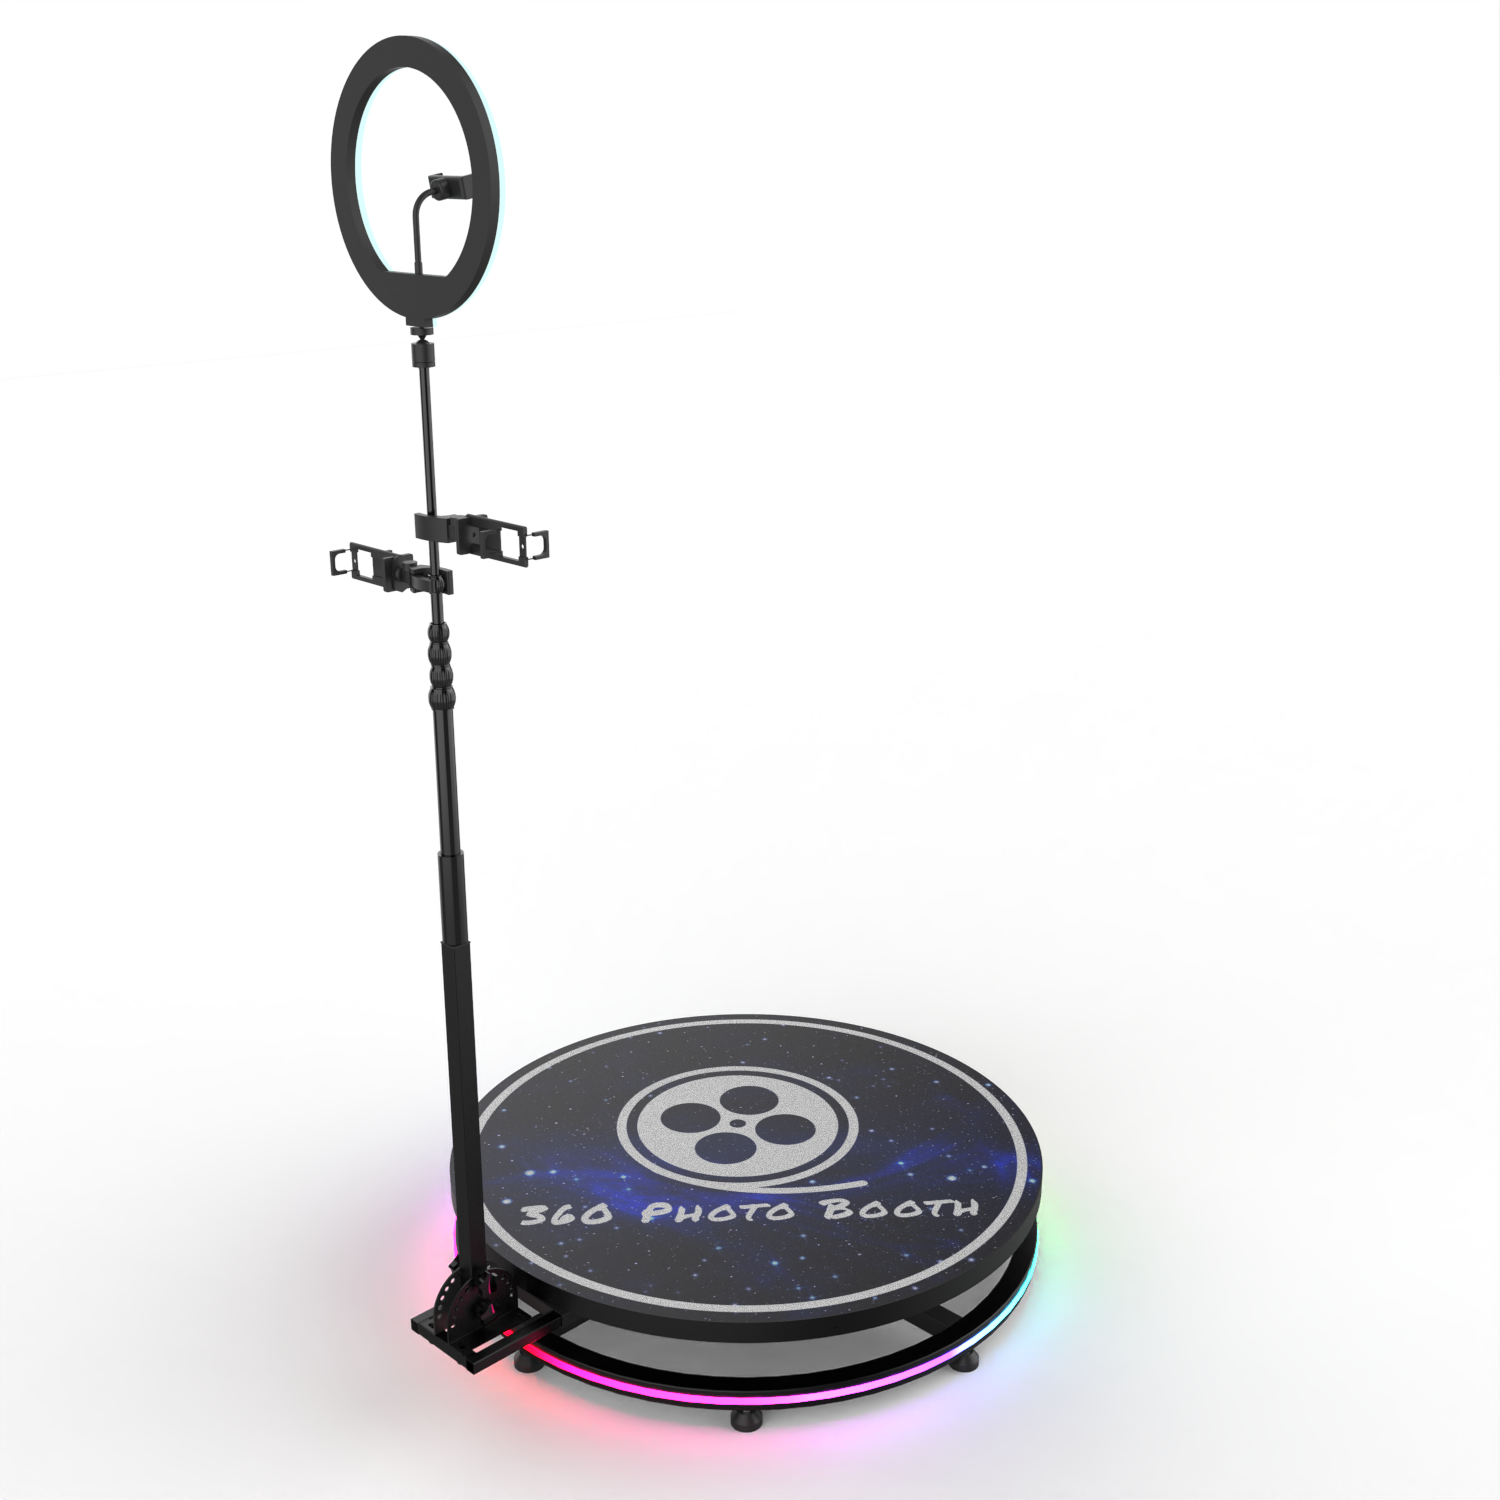 360 Photo Booth PRO - 115cm AUTOMATIC Metal Round Shape (360 camera booth,  360 video booth) - 360PhotoBoothPRO